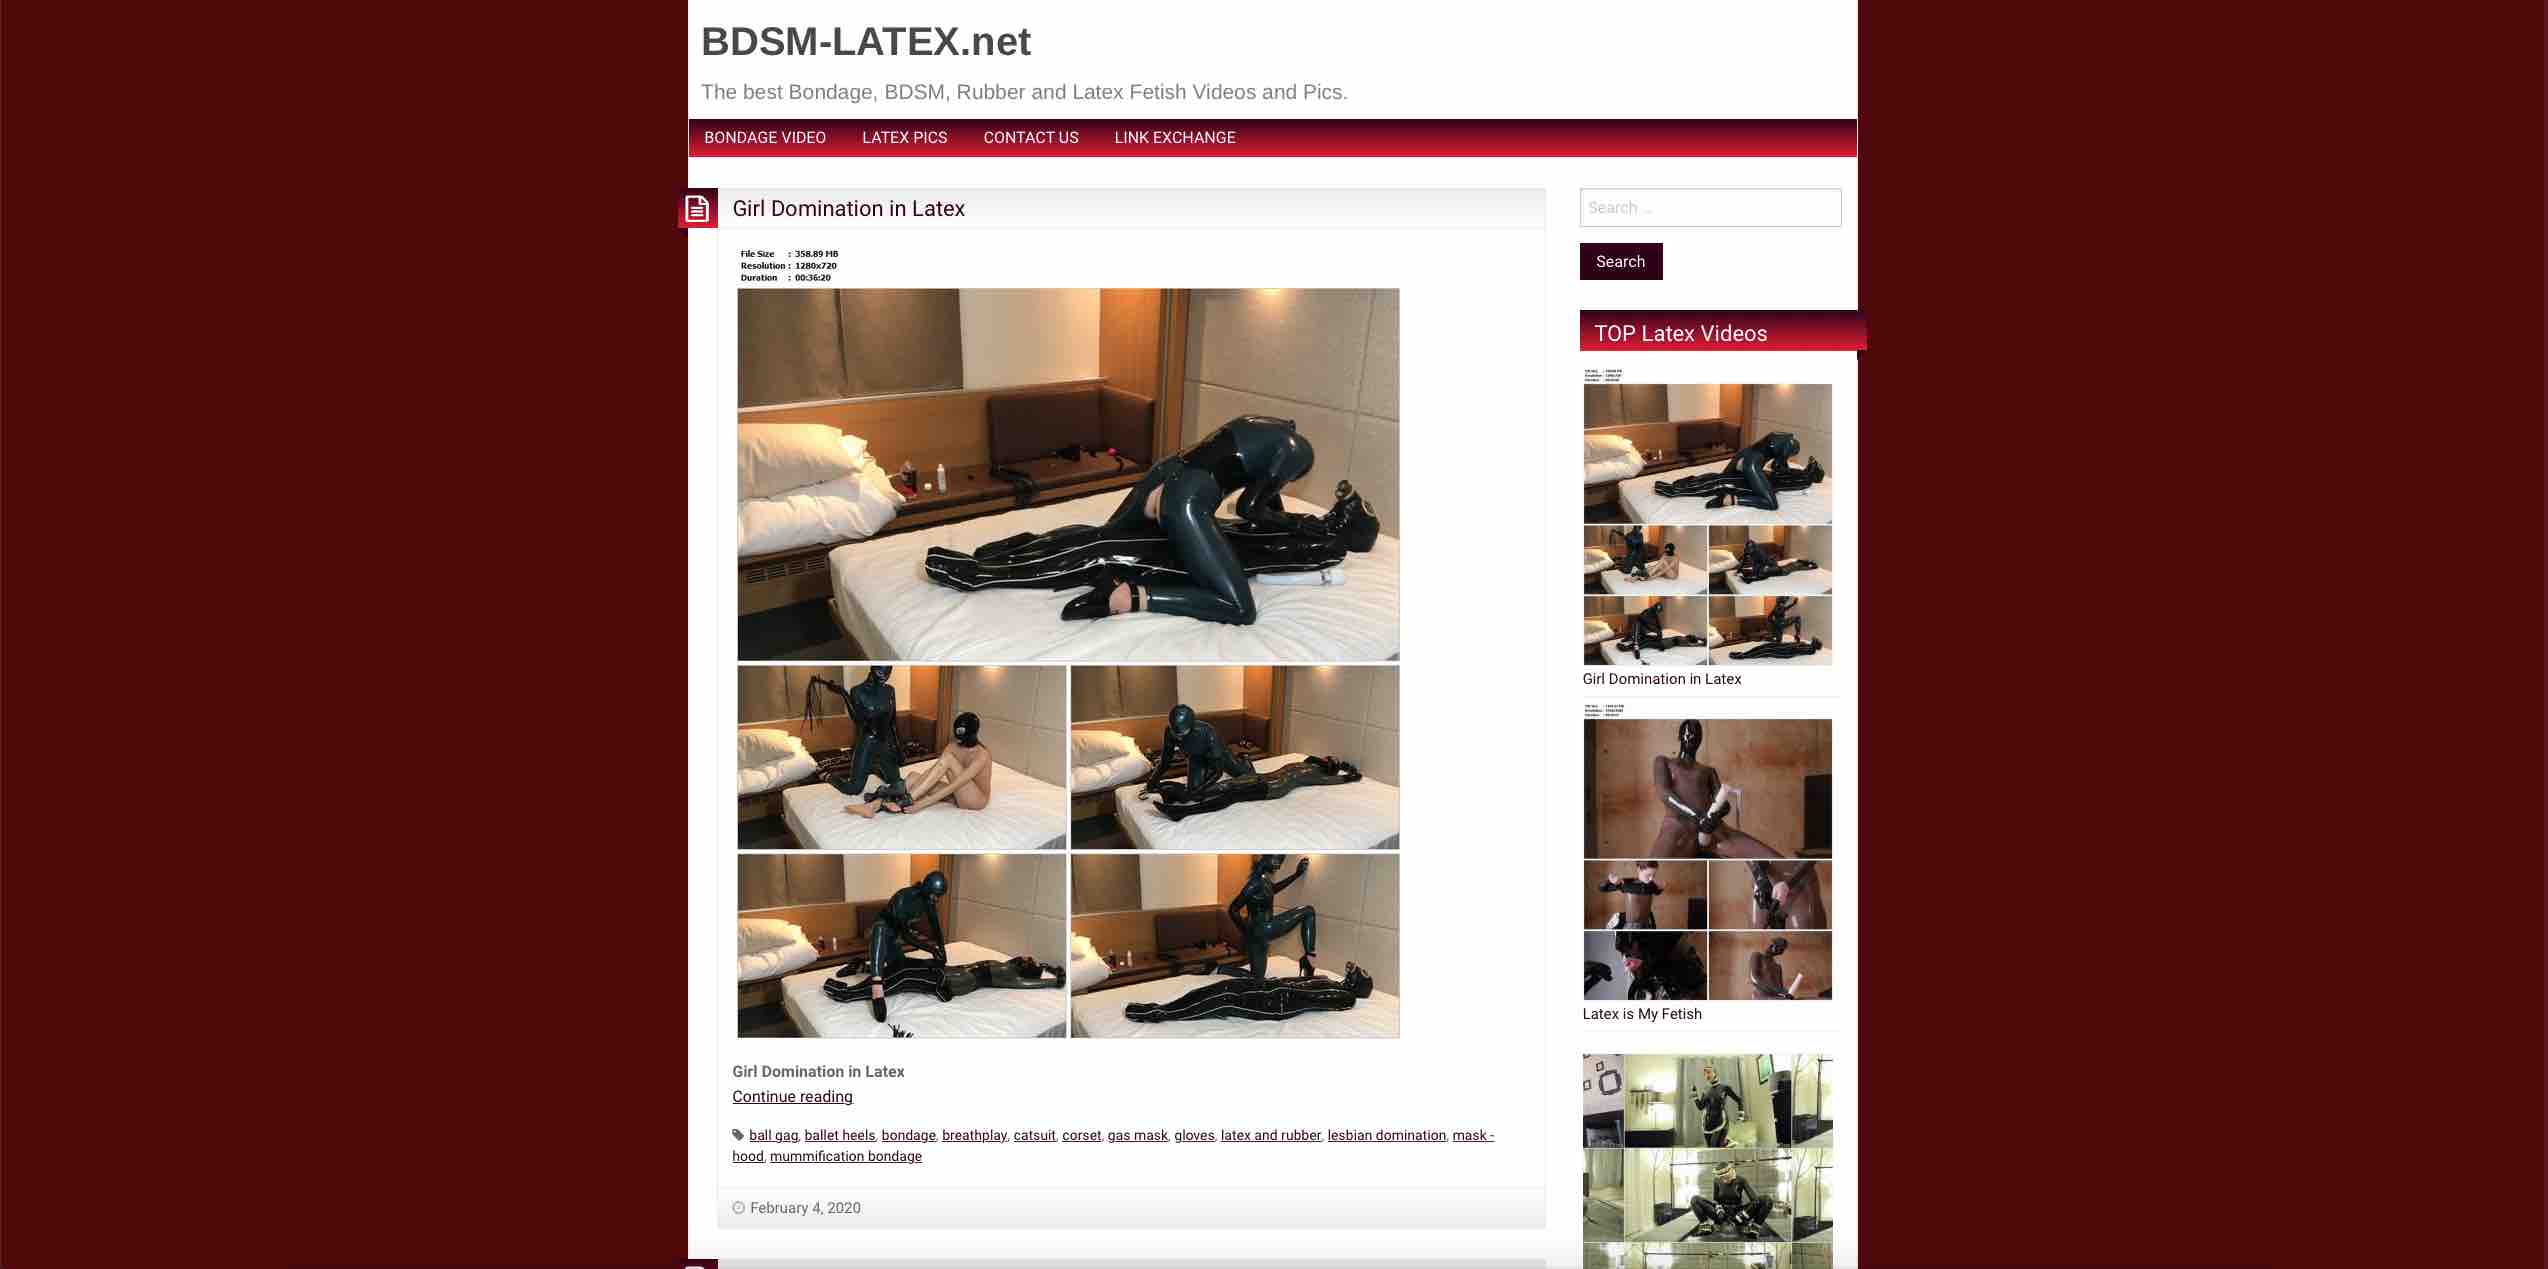 Bdsm Website Search - Porn Pics And Movies